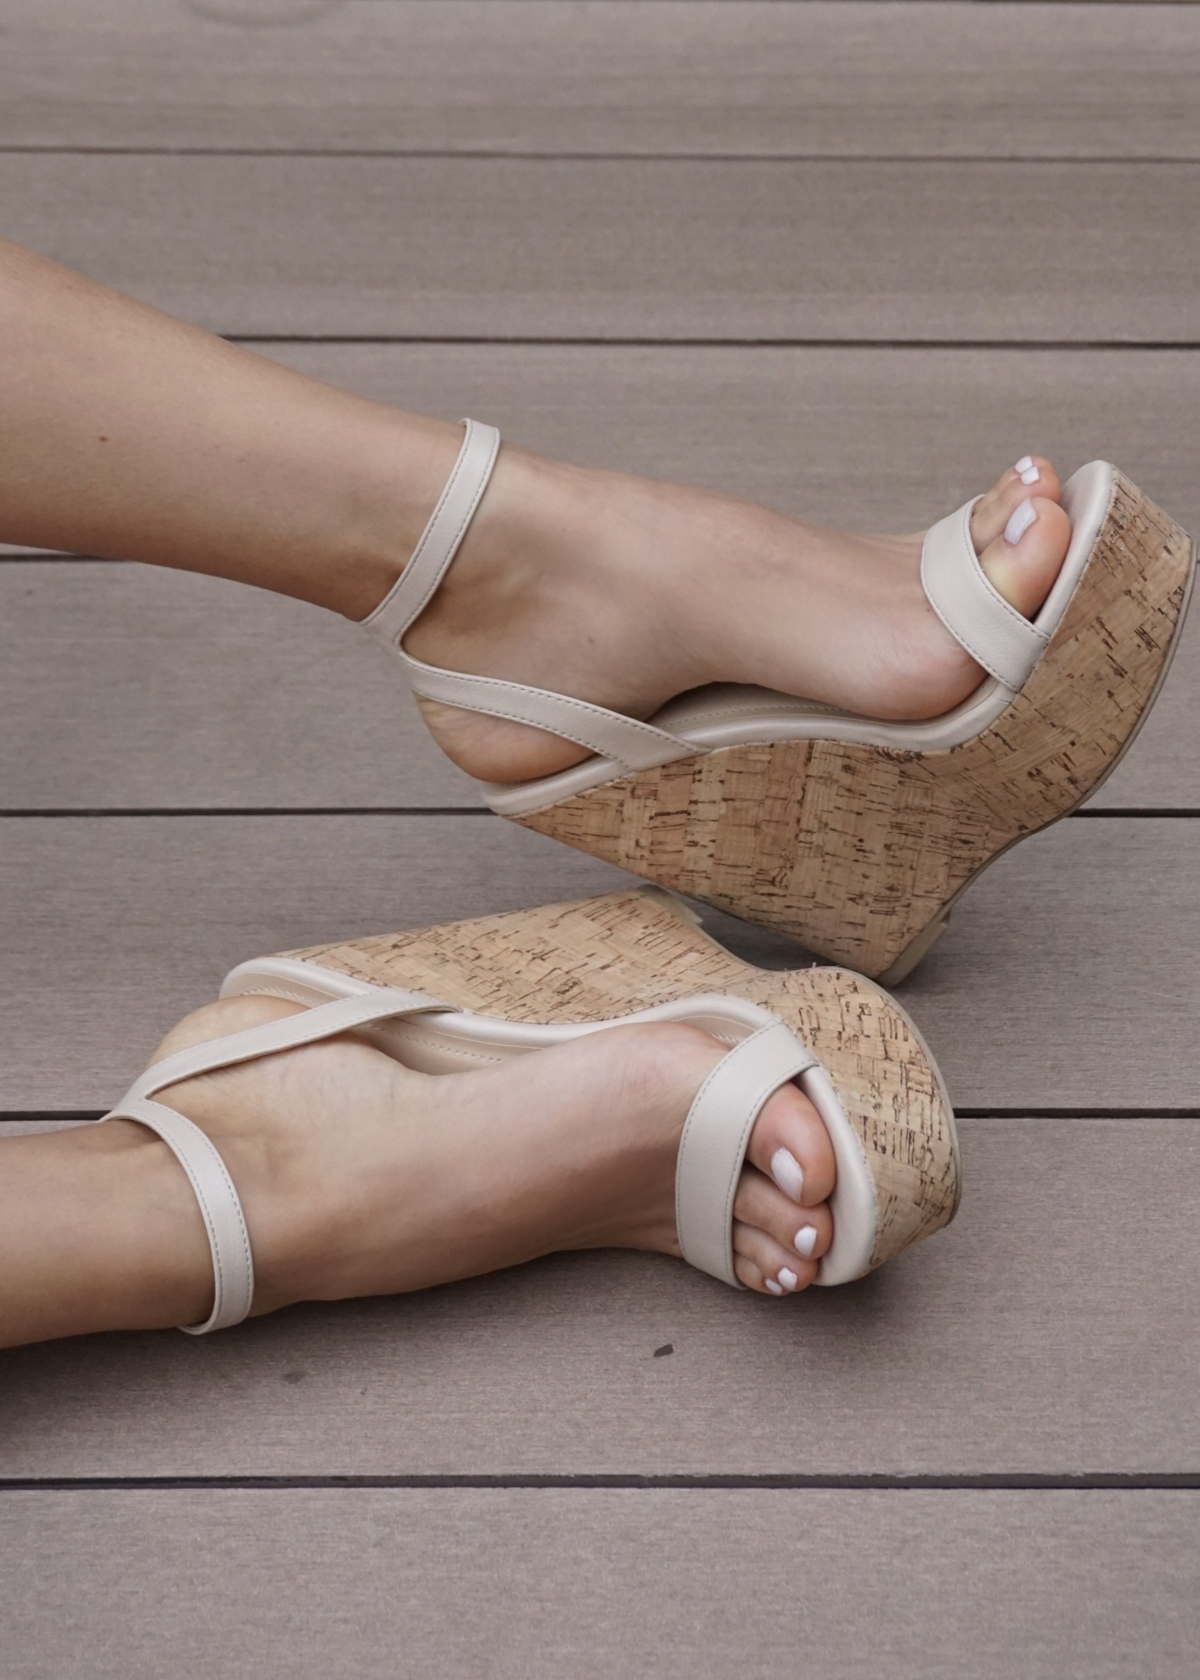 Wedges Shoes: Style Of New Generation